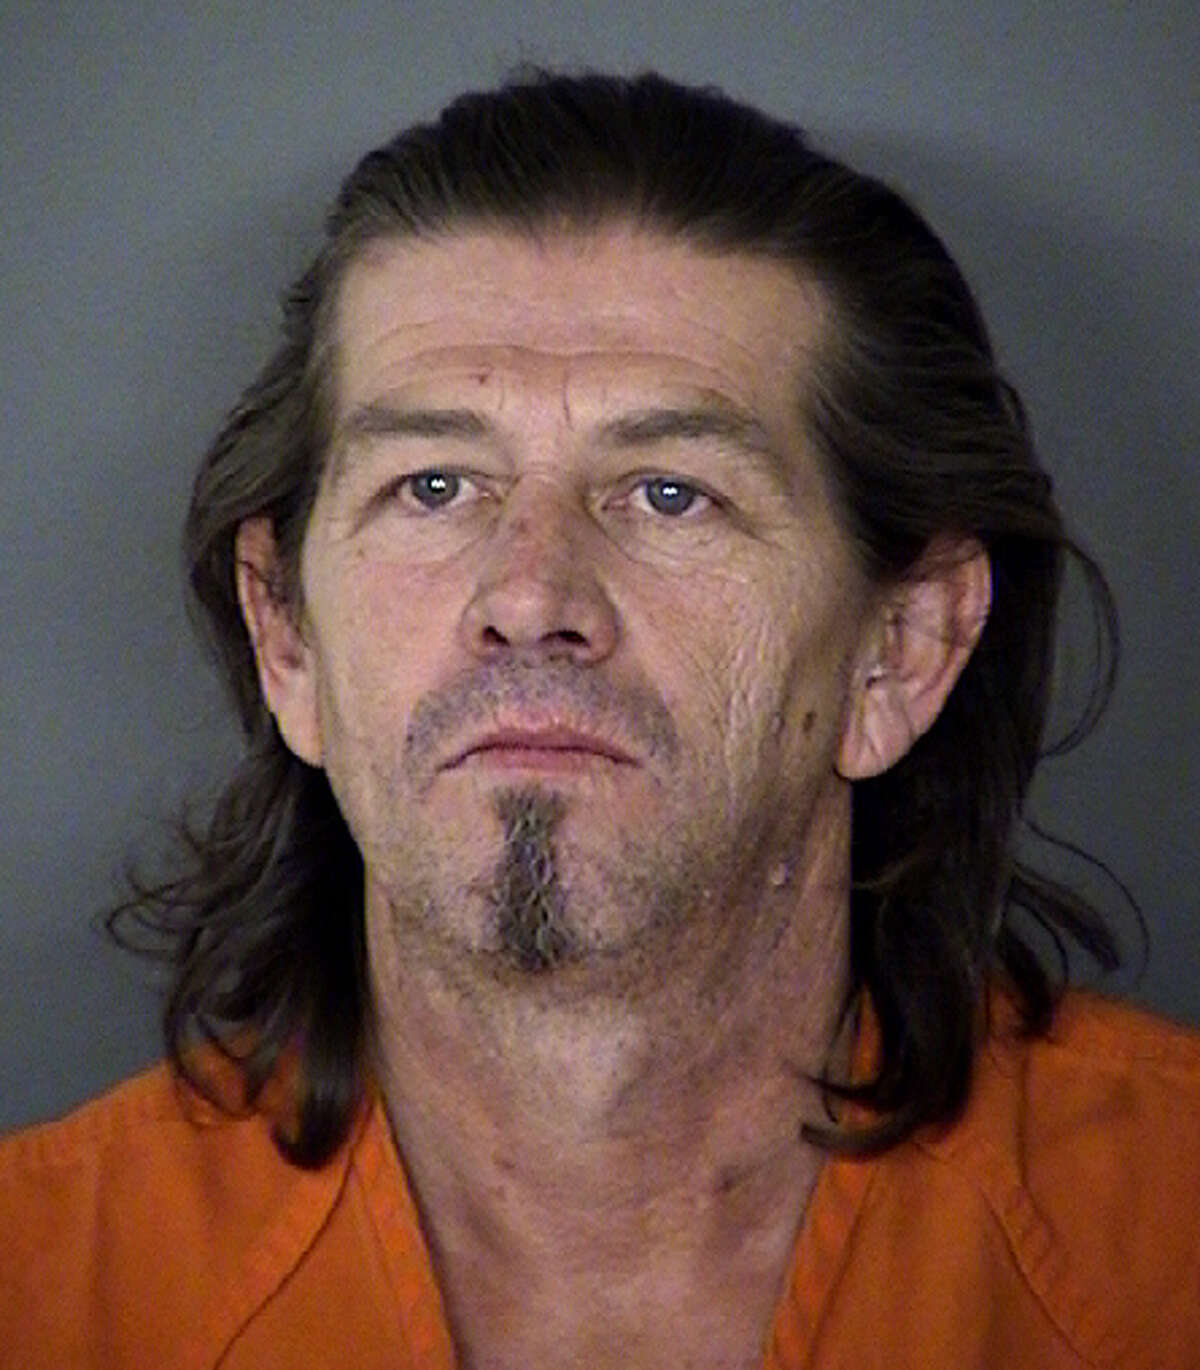 Michael Scott Quinn, 50, was arrested and charged with one count of murder on Sunday, May 5, 2013, in the slaying of Albert Guerra, 56.